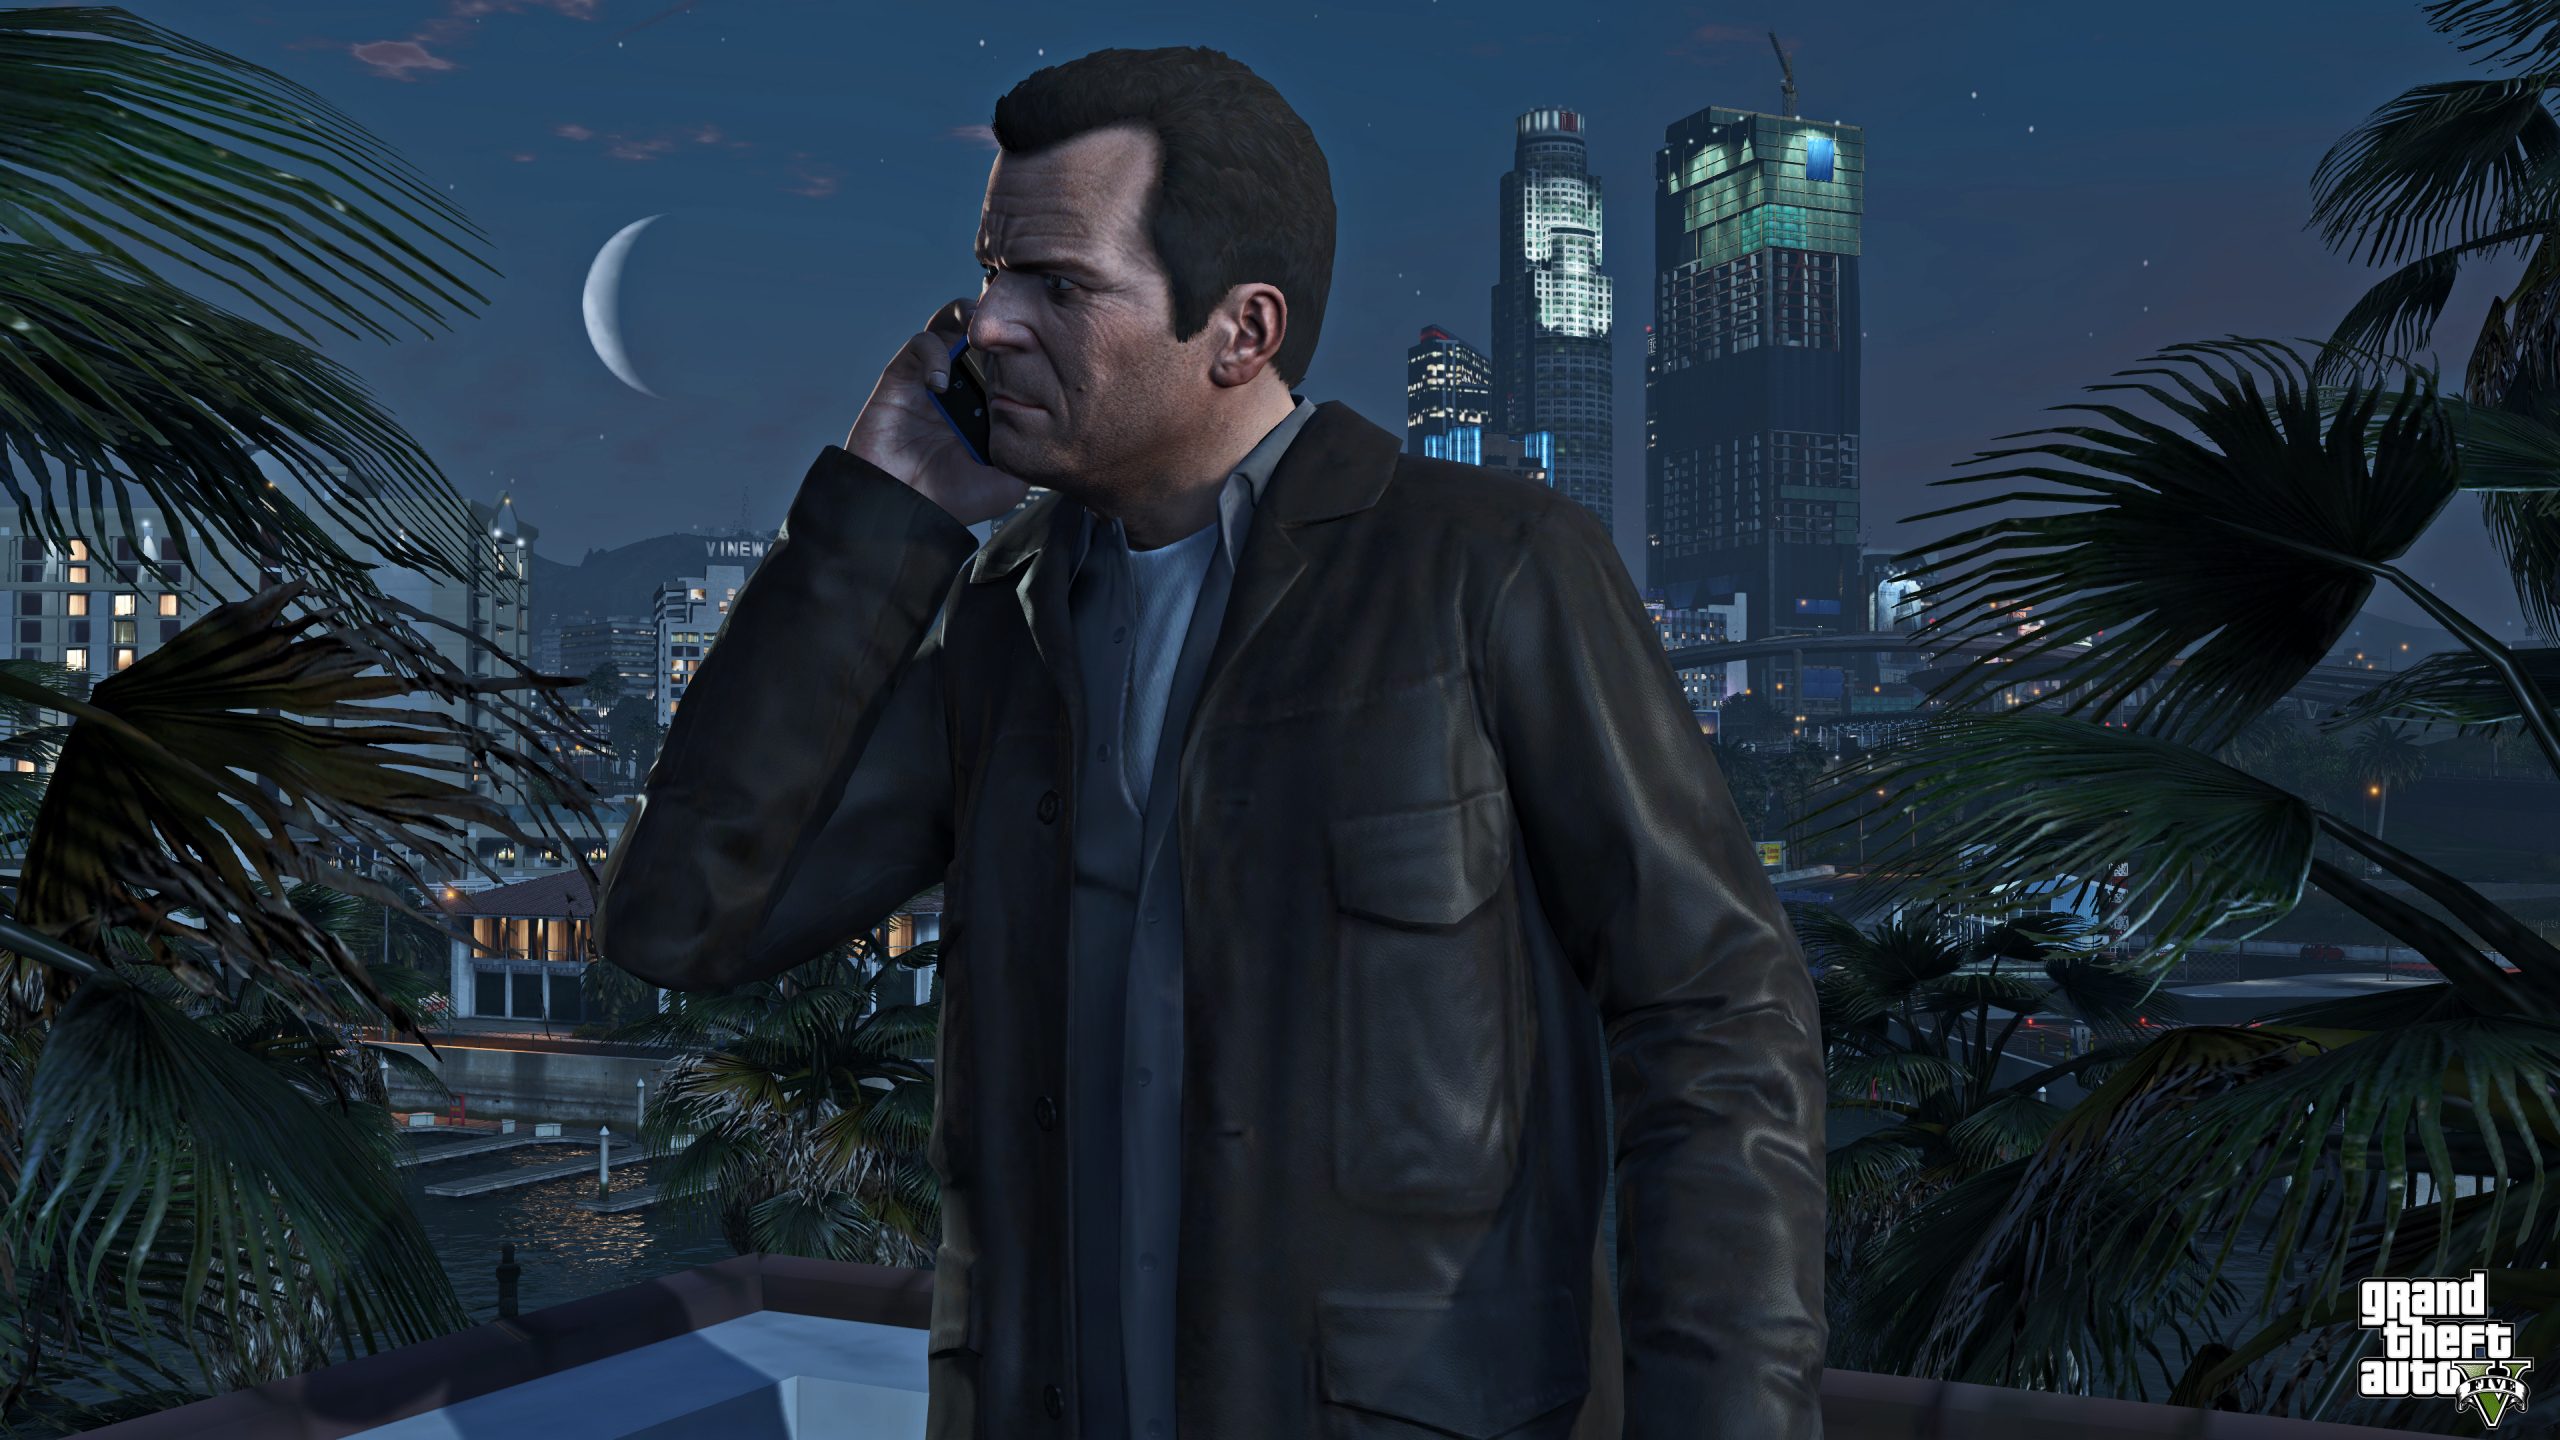 Grand Theft Auto V on PC: What You Need to Know About the New Version